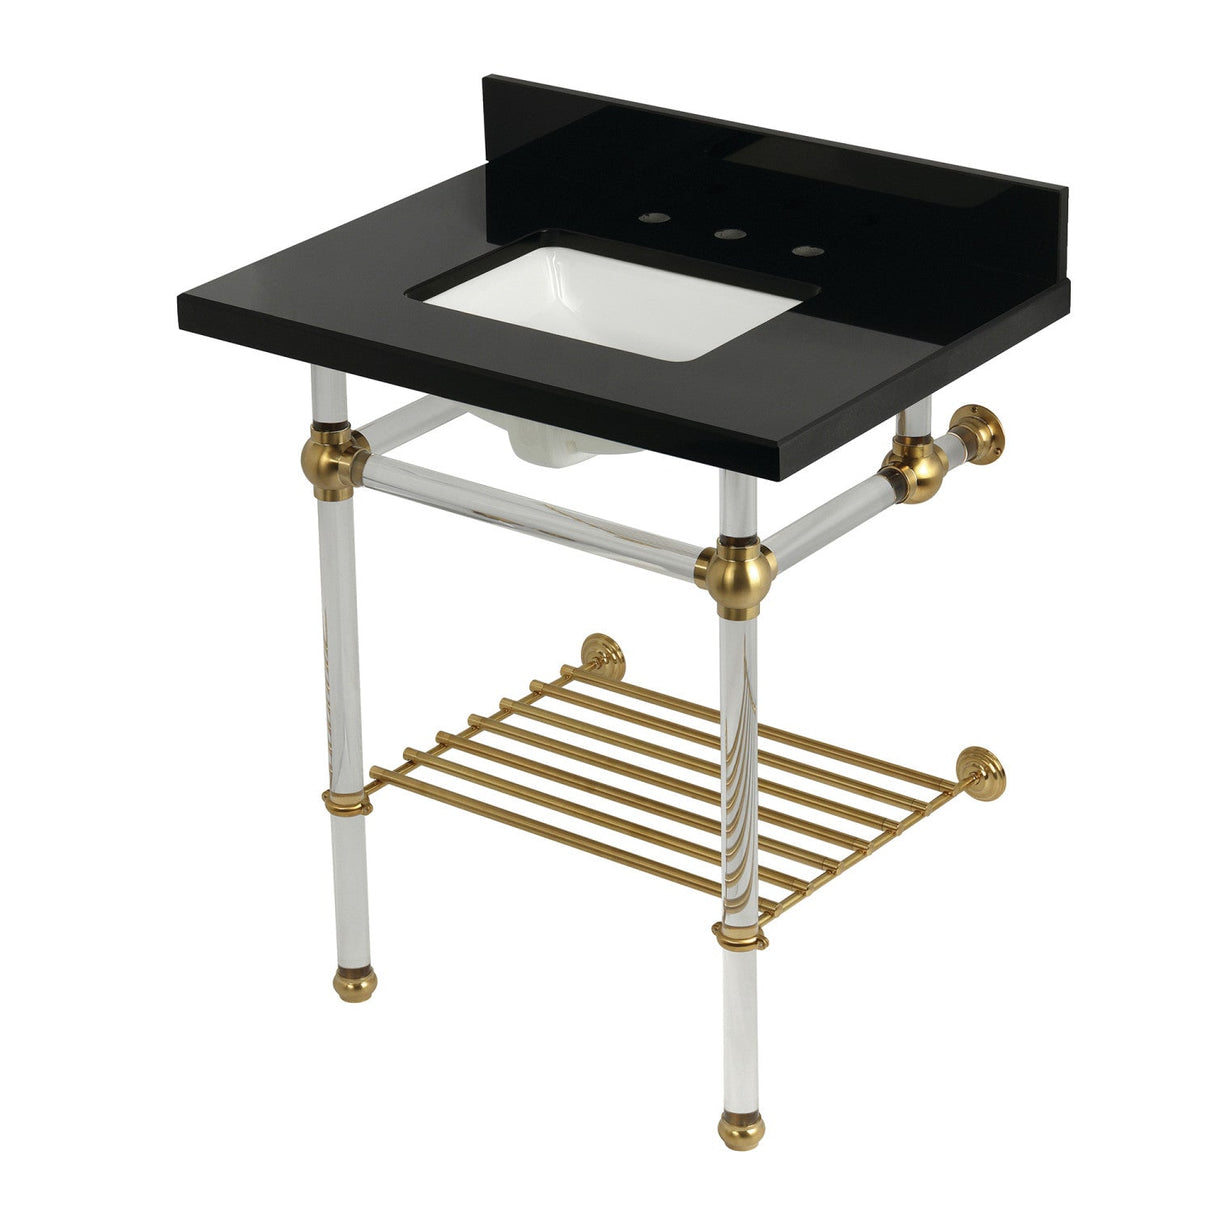 Templeton KVPK30KASQB7 30-Inch Console Sink with Acrylic Legs (8-Inch, 3 Hole), Black Granite/Brushed Brass